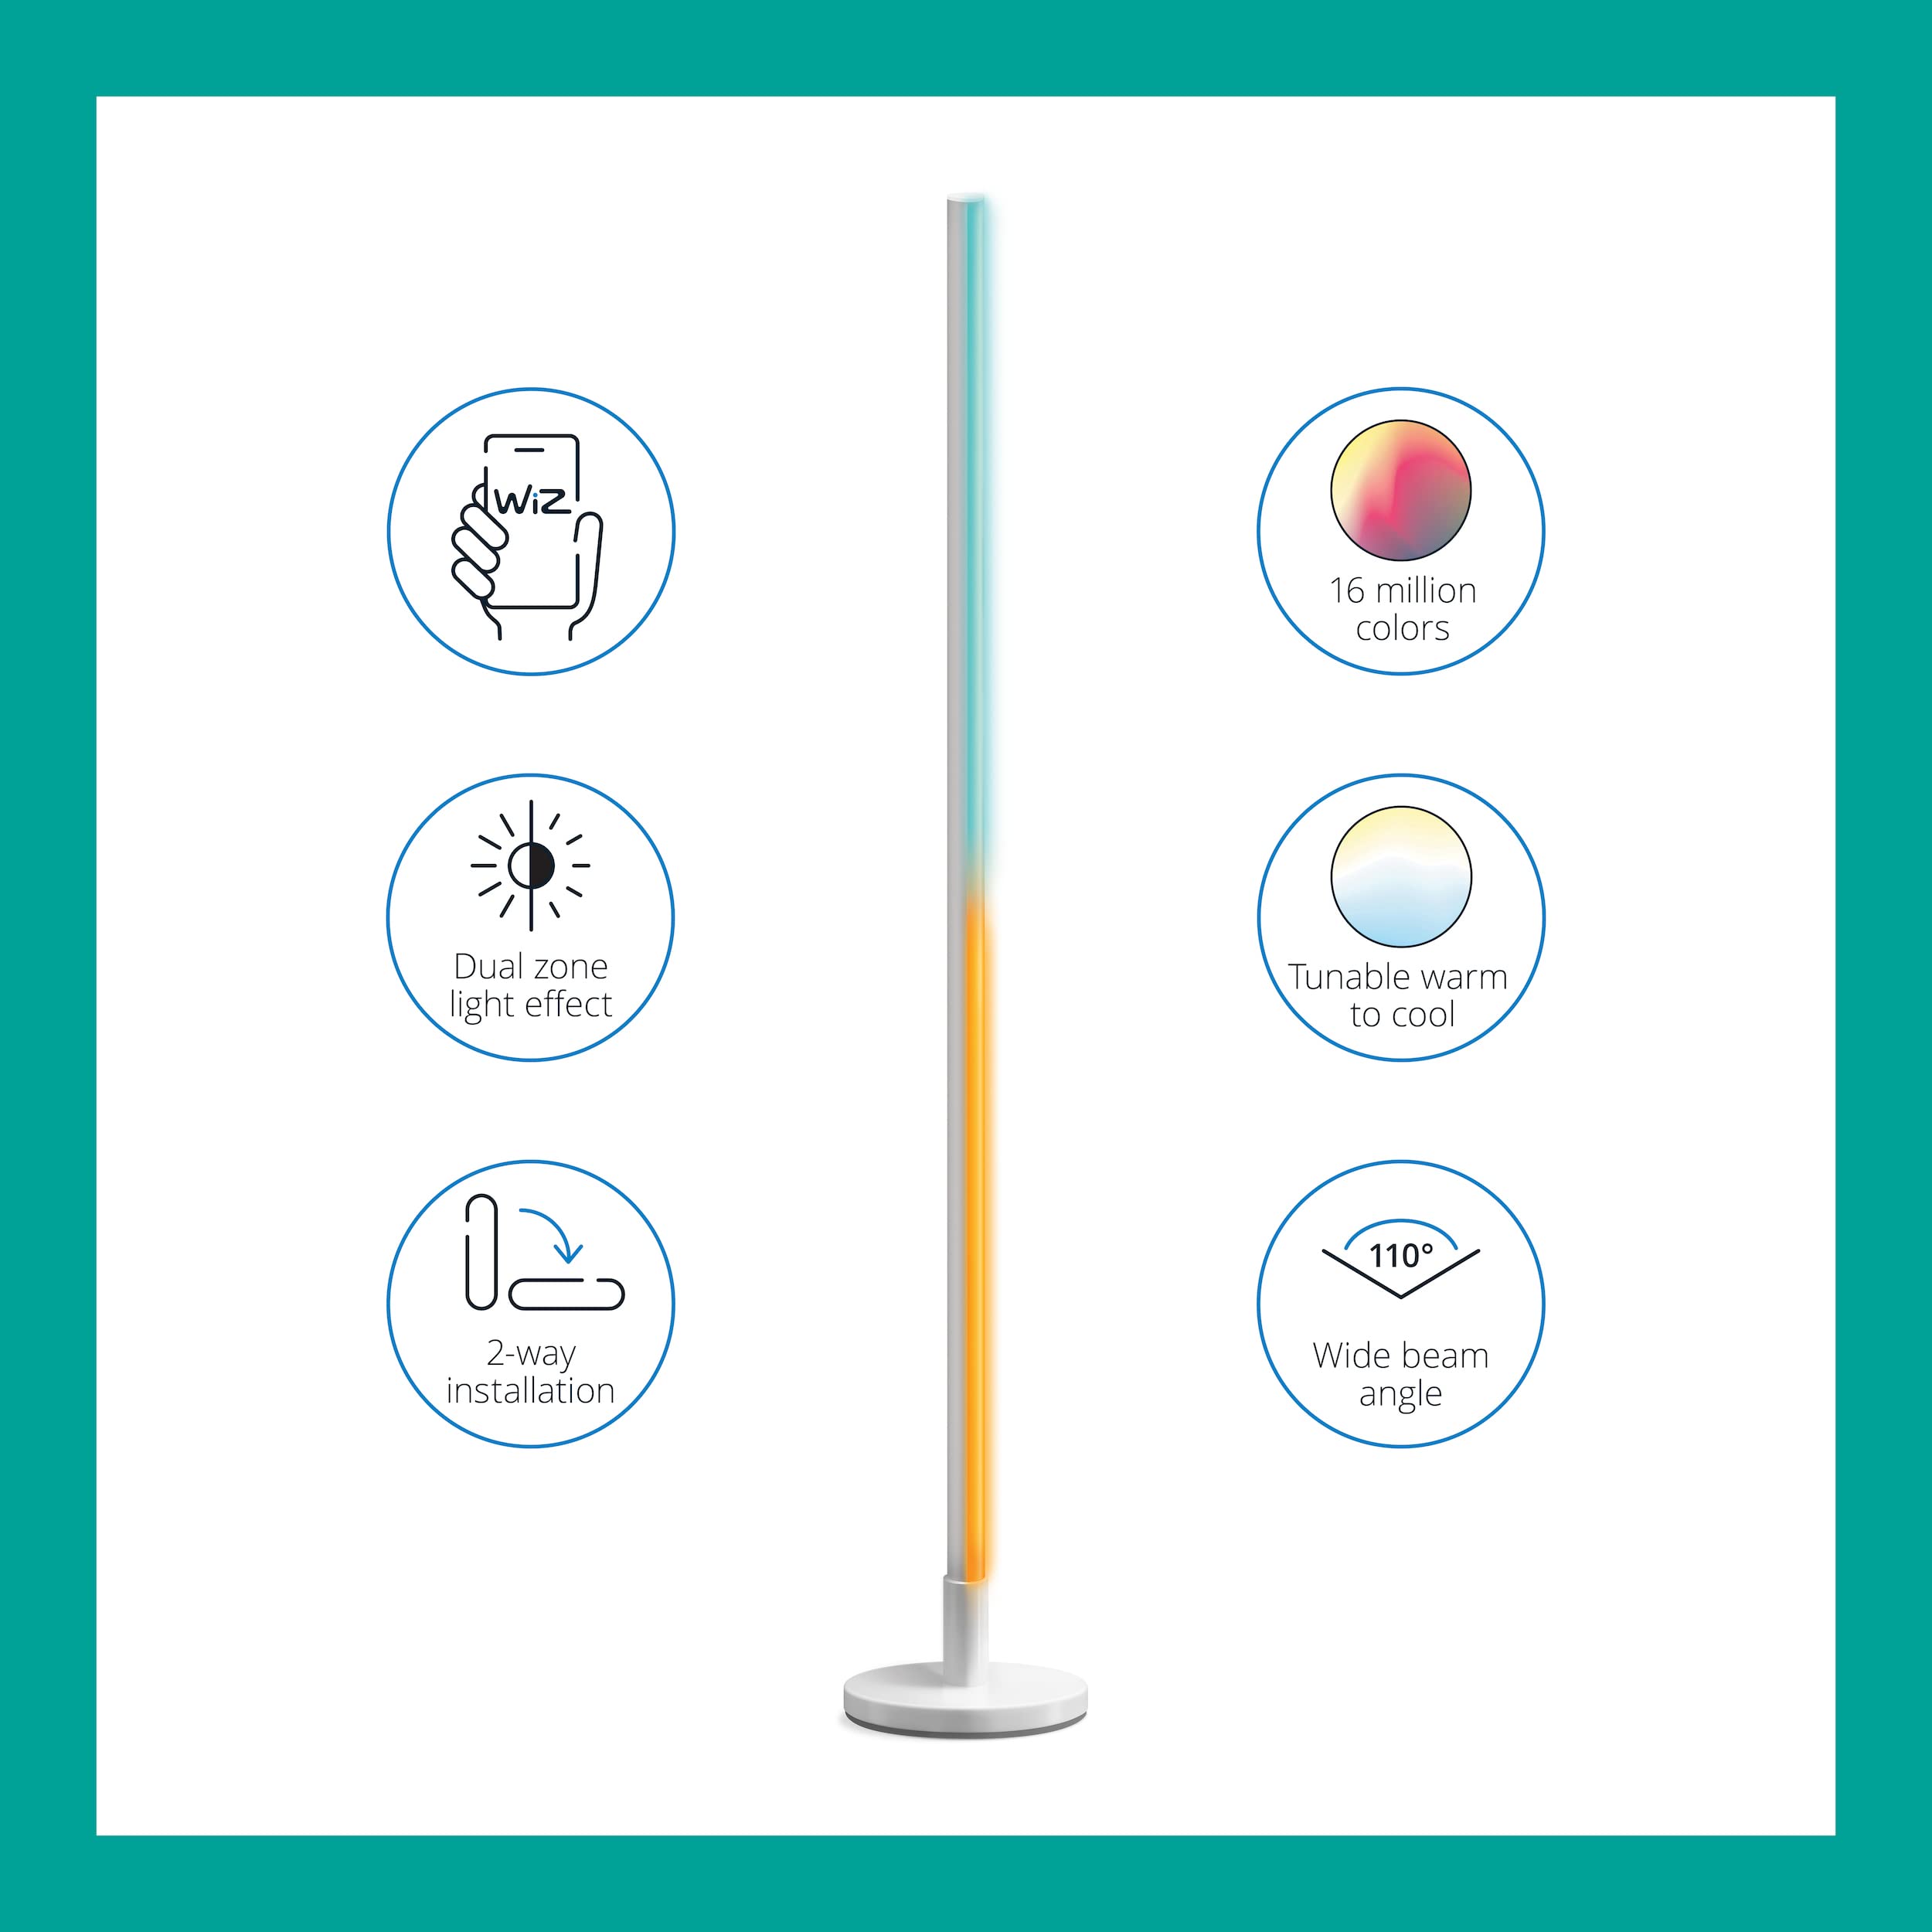 WiZ Pole Floor Light - Pack of 1 - Portable, Smart, Full-Color LED Light - Connects to Your Existing Wi-Fi - Control with Voice or App - Works with Google Home, Alexa and Siri Shortcuts